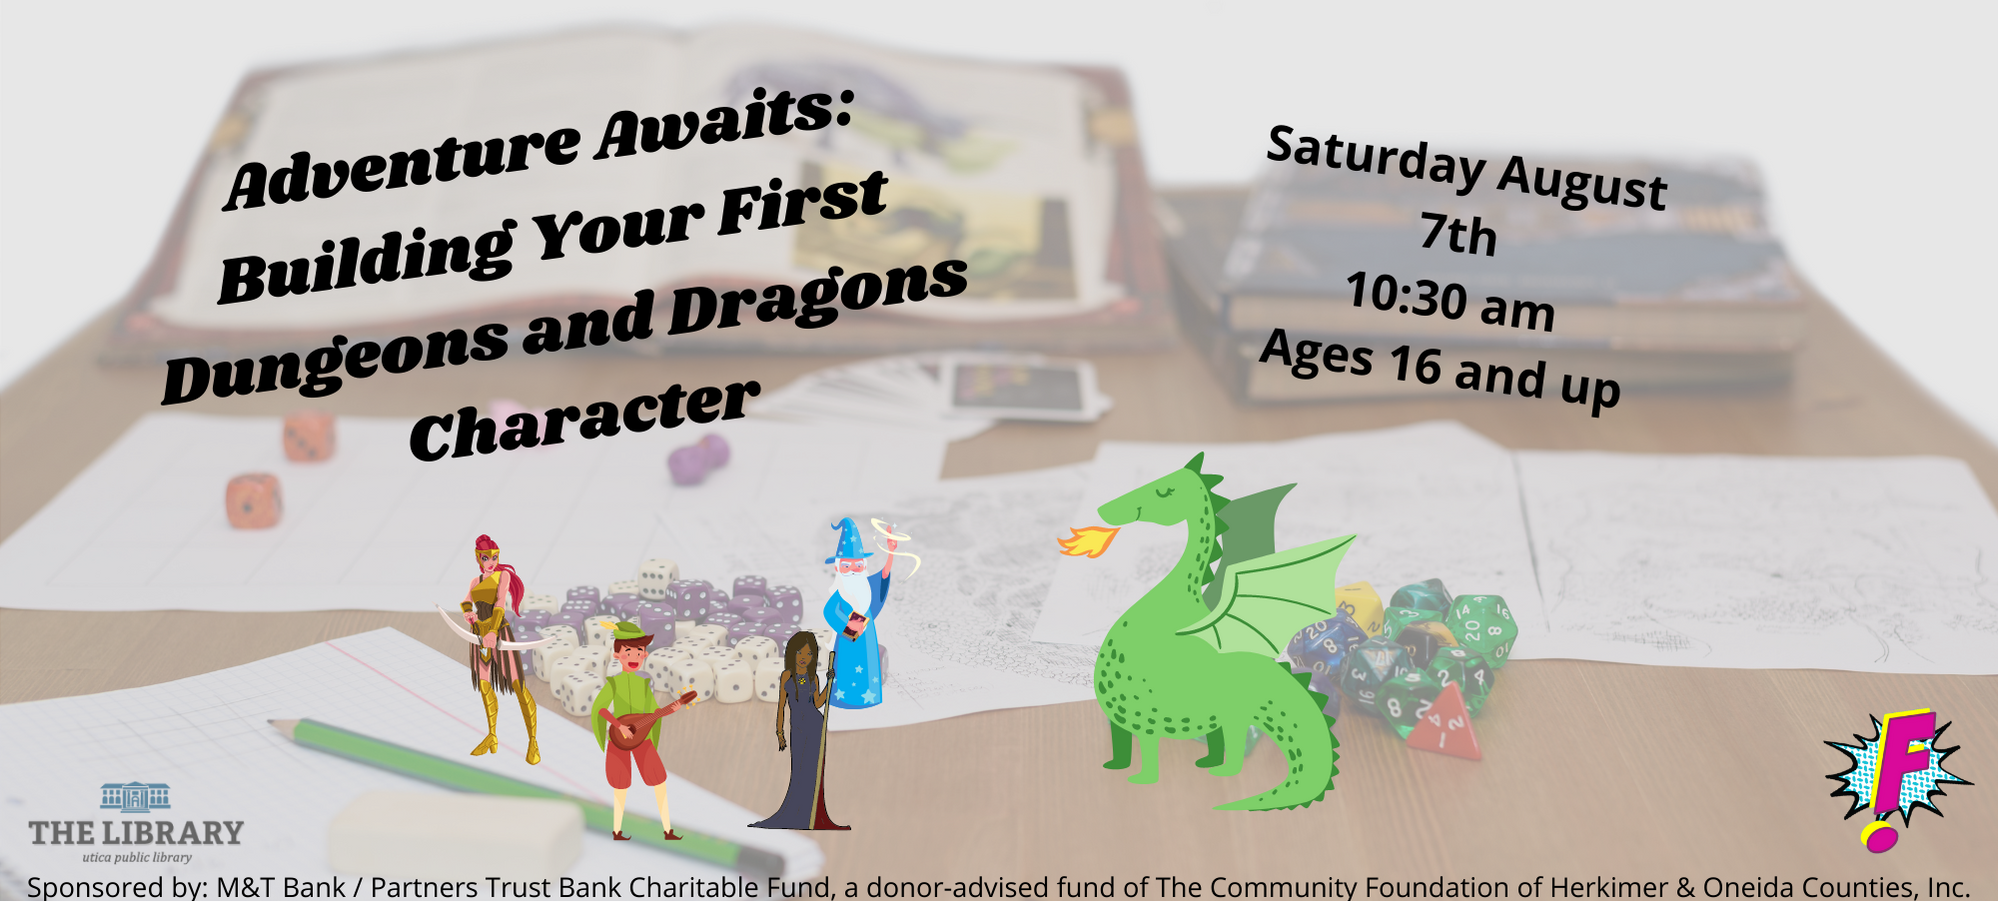 Adventure Awaits Building Your First Dungeons and Dragons Character